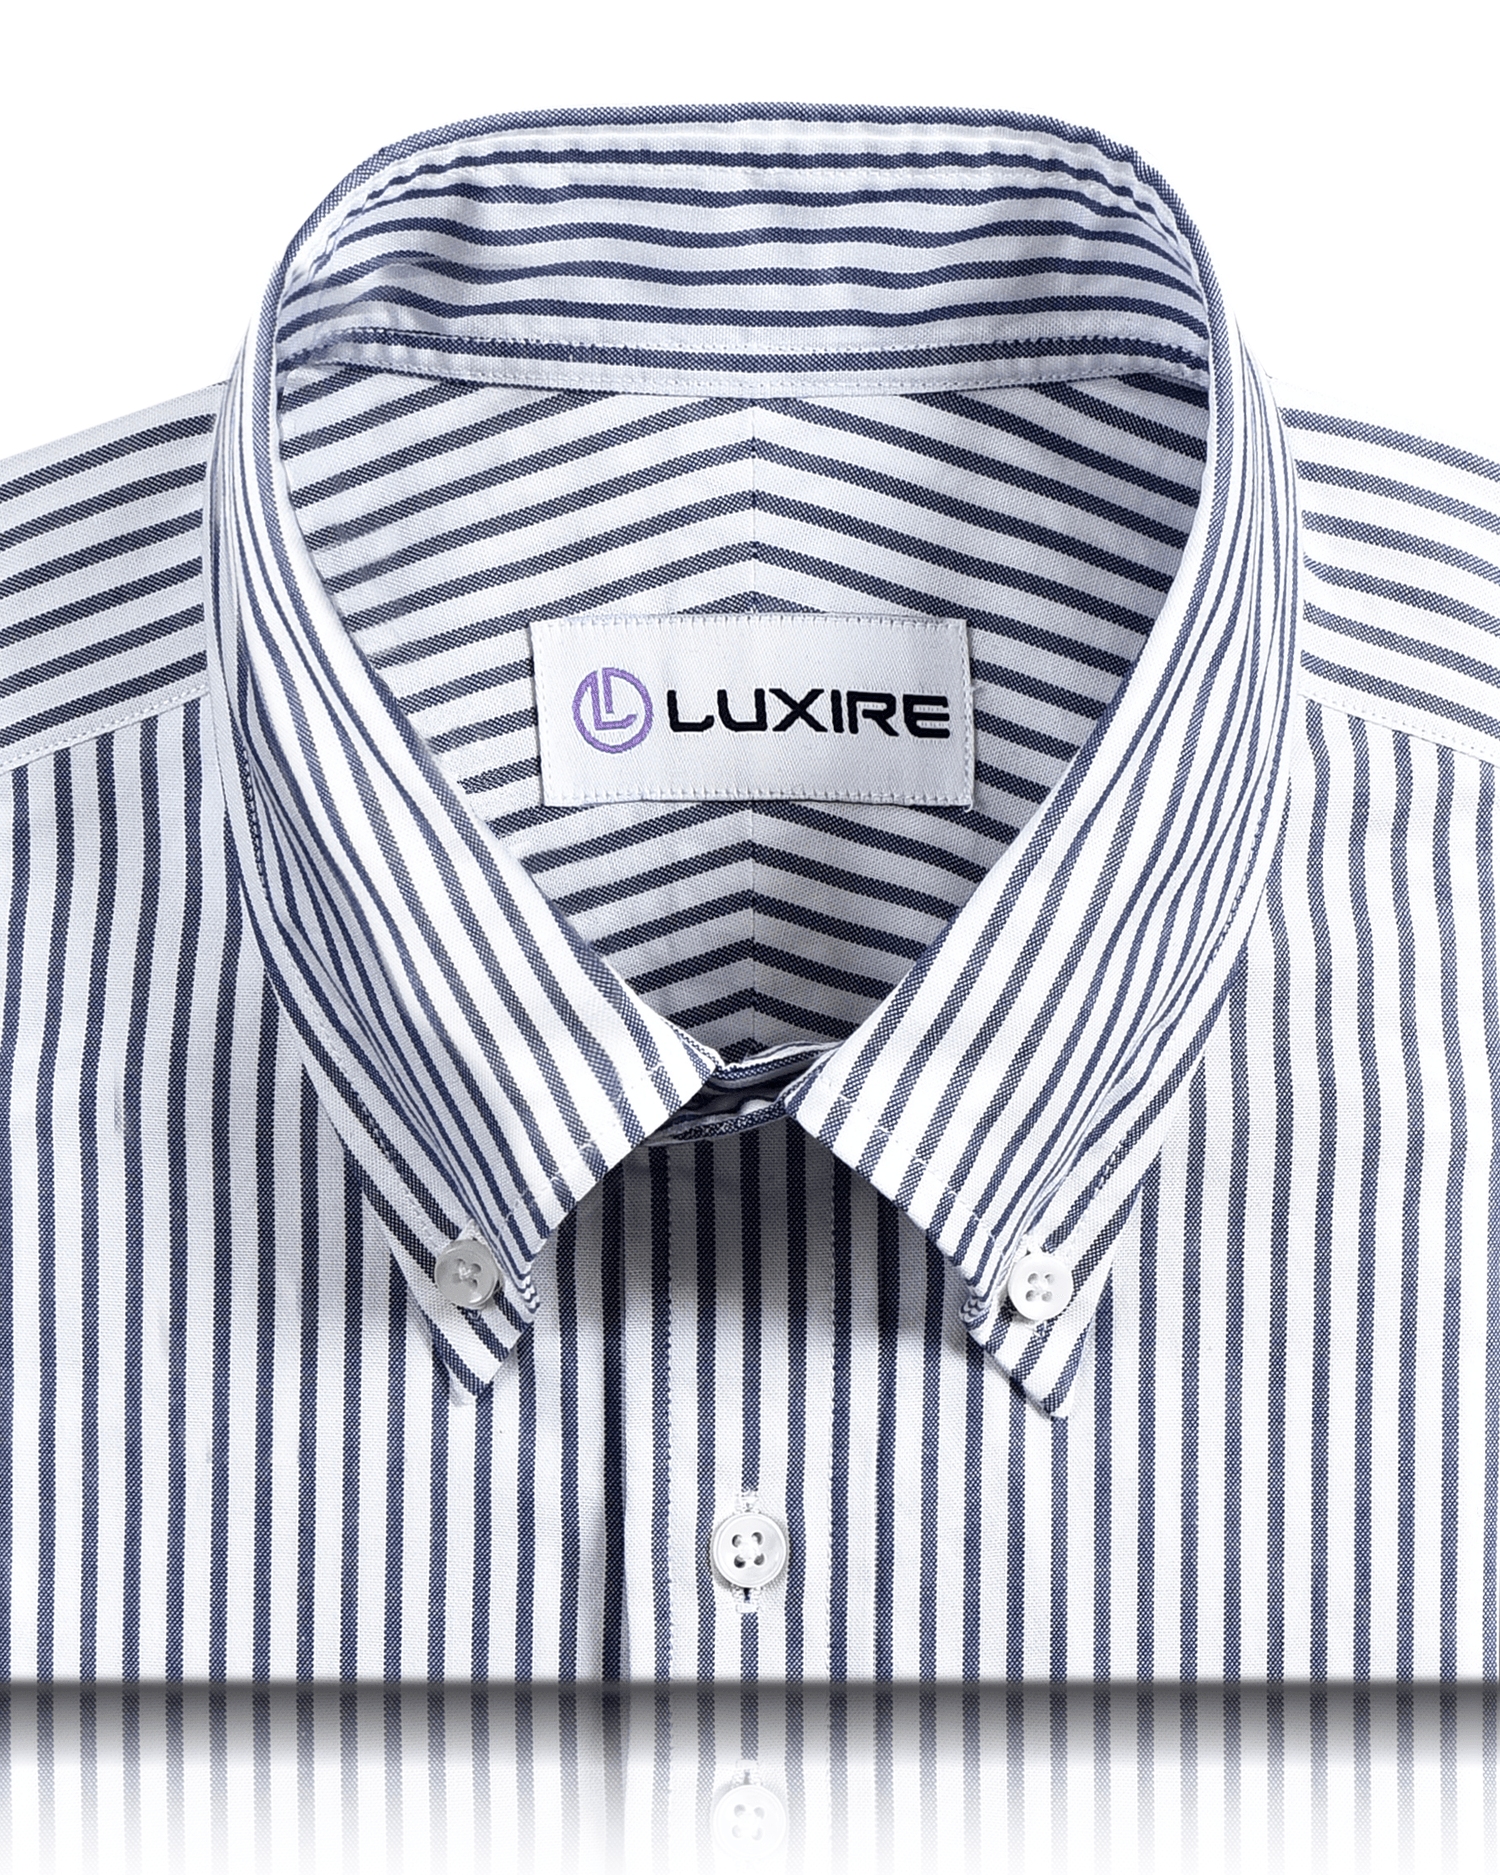 Collar of the custom oxford shirt for men by Luxire in white with navy candy stripes